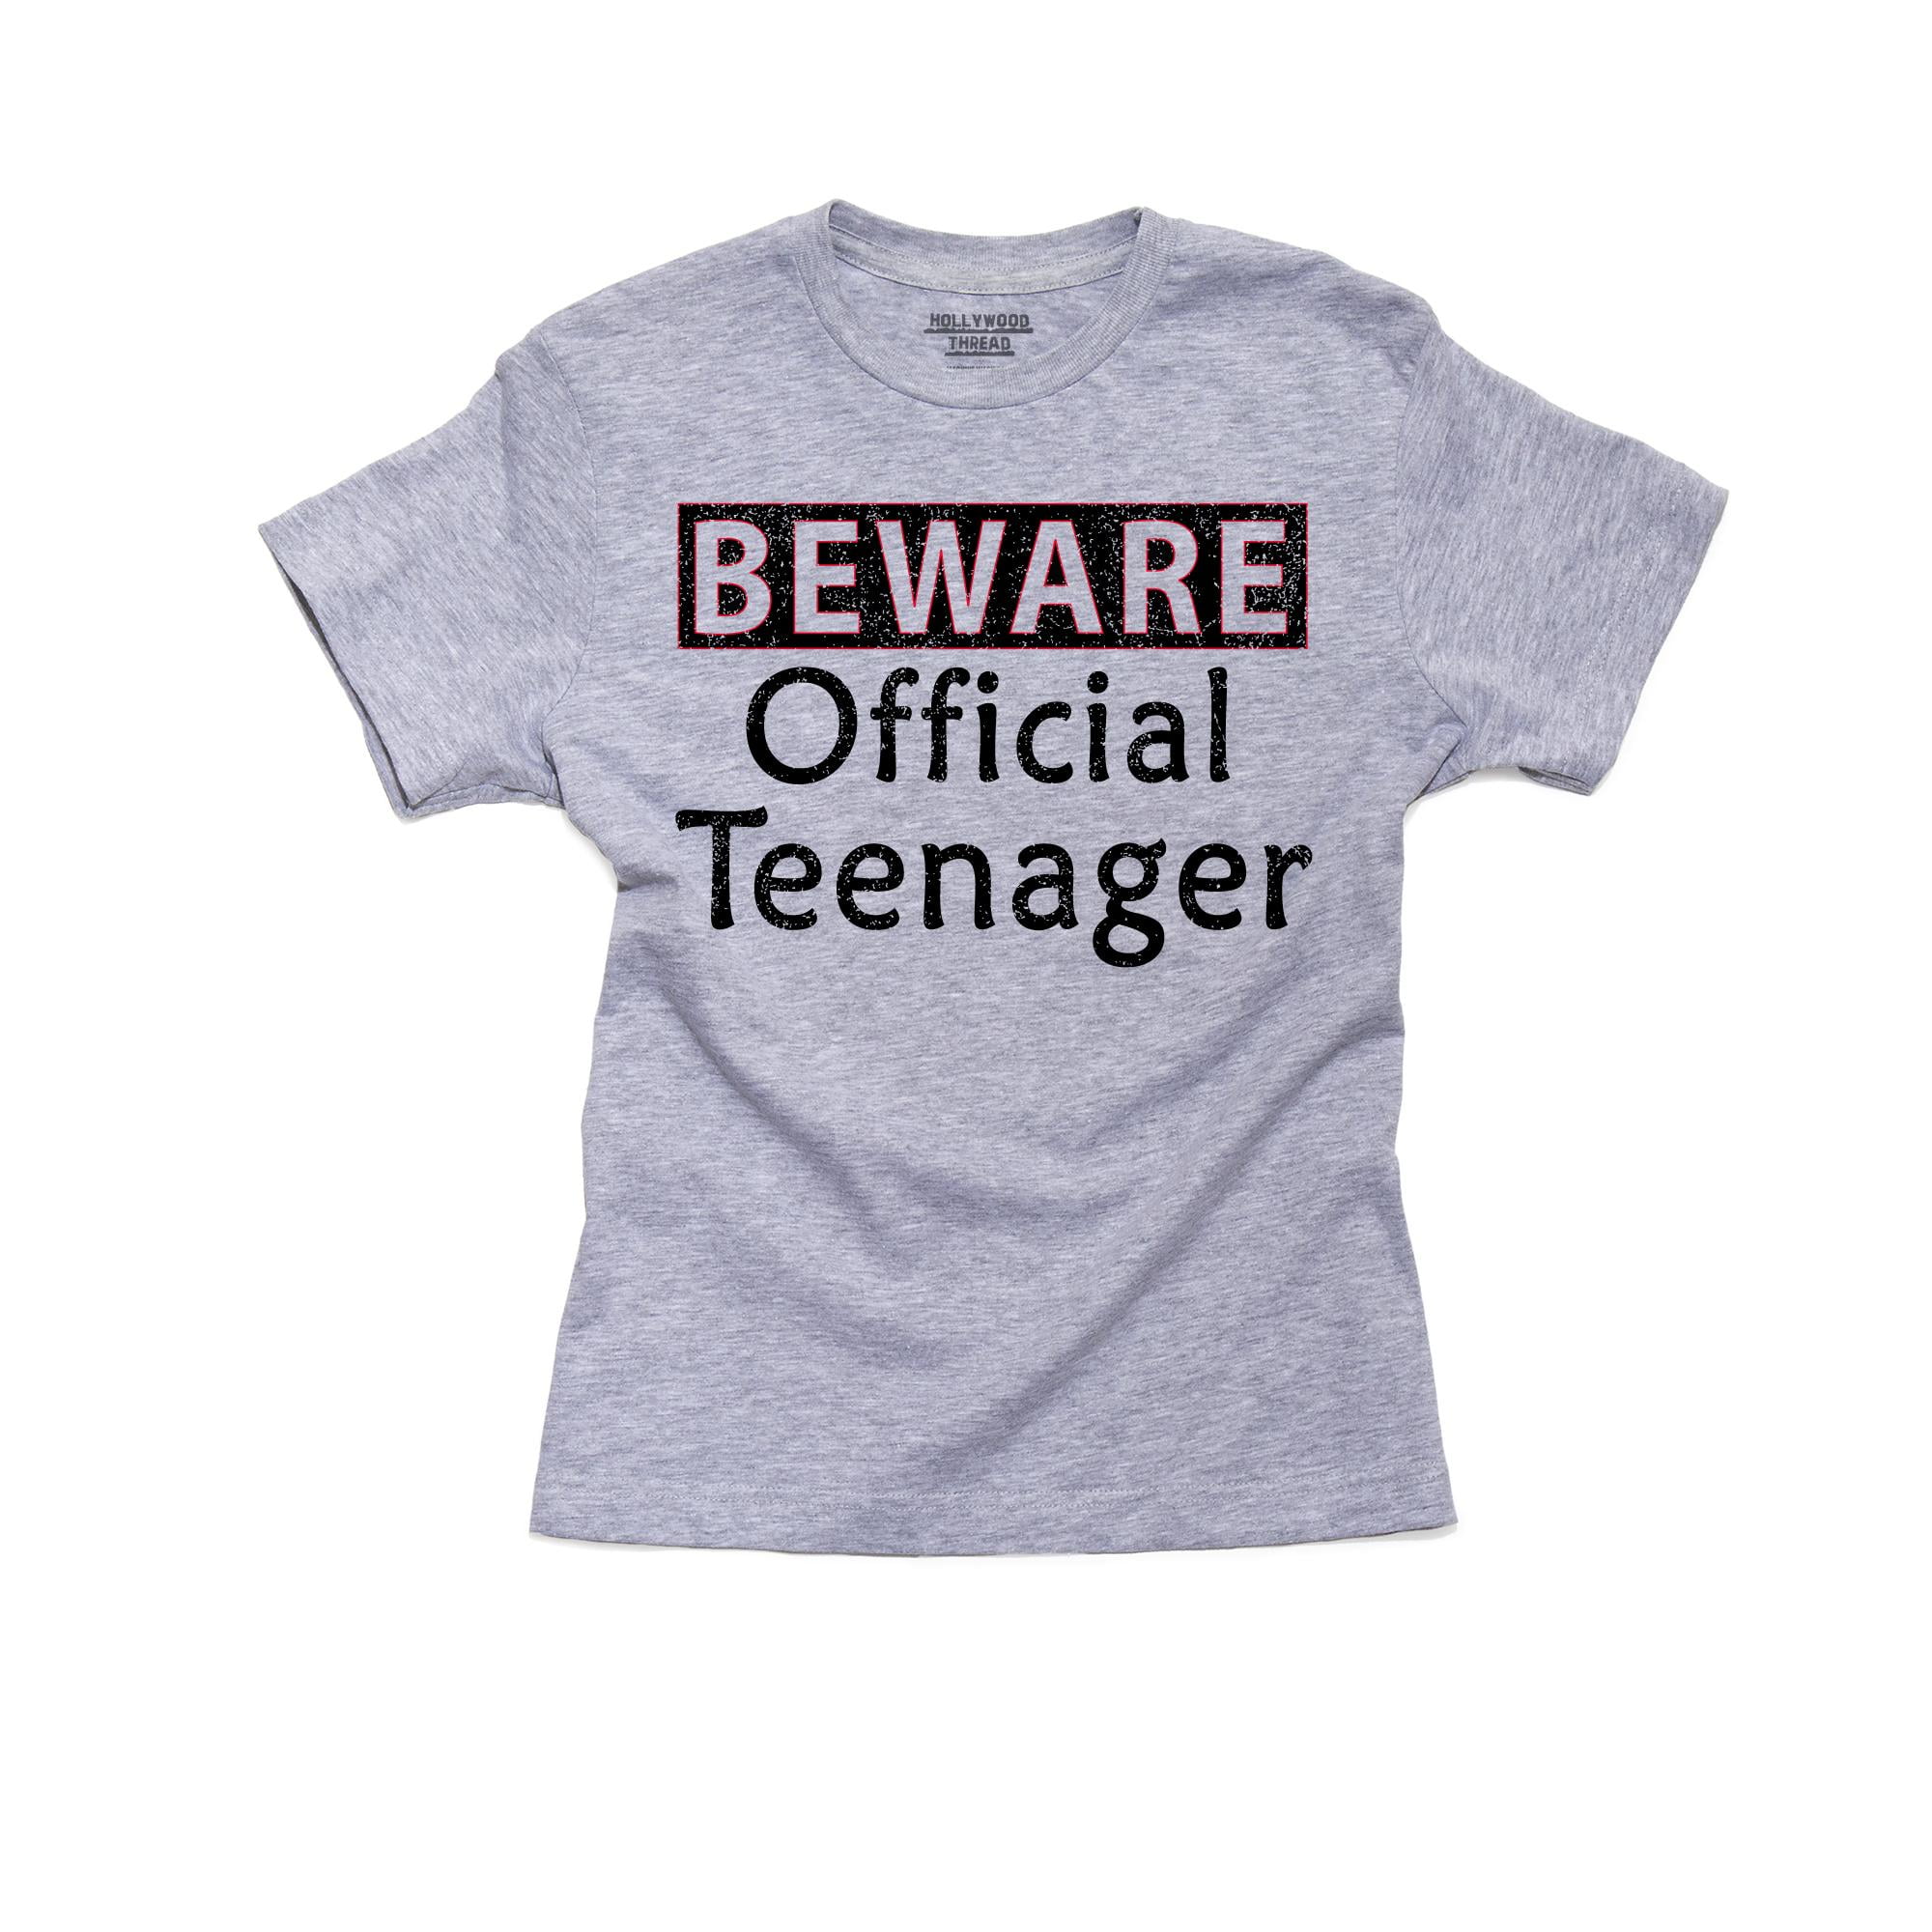 Beware Official Teenager - Great 13th Birthday Design Cotton Youth Grey T-Shirt - Walmart.com